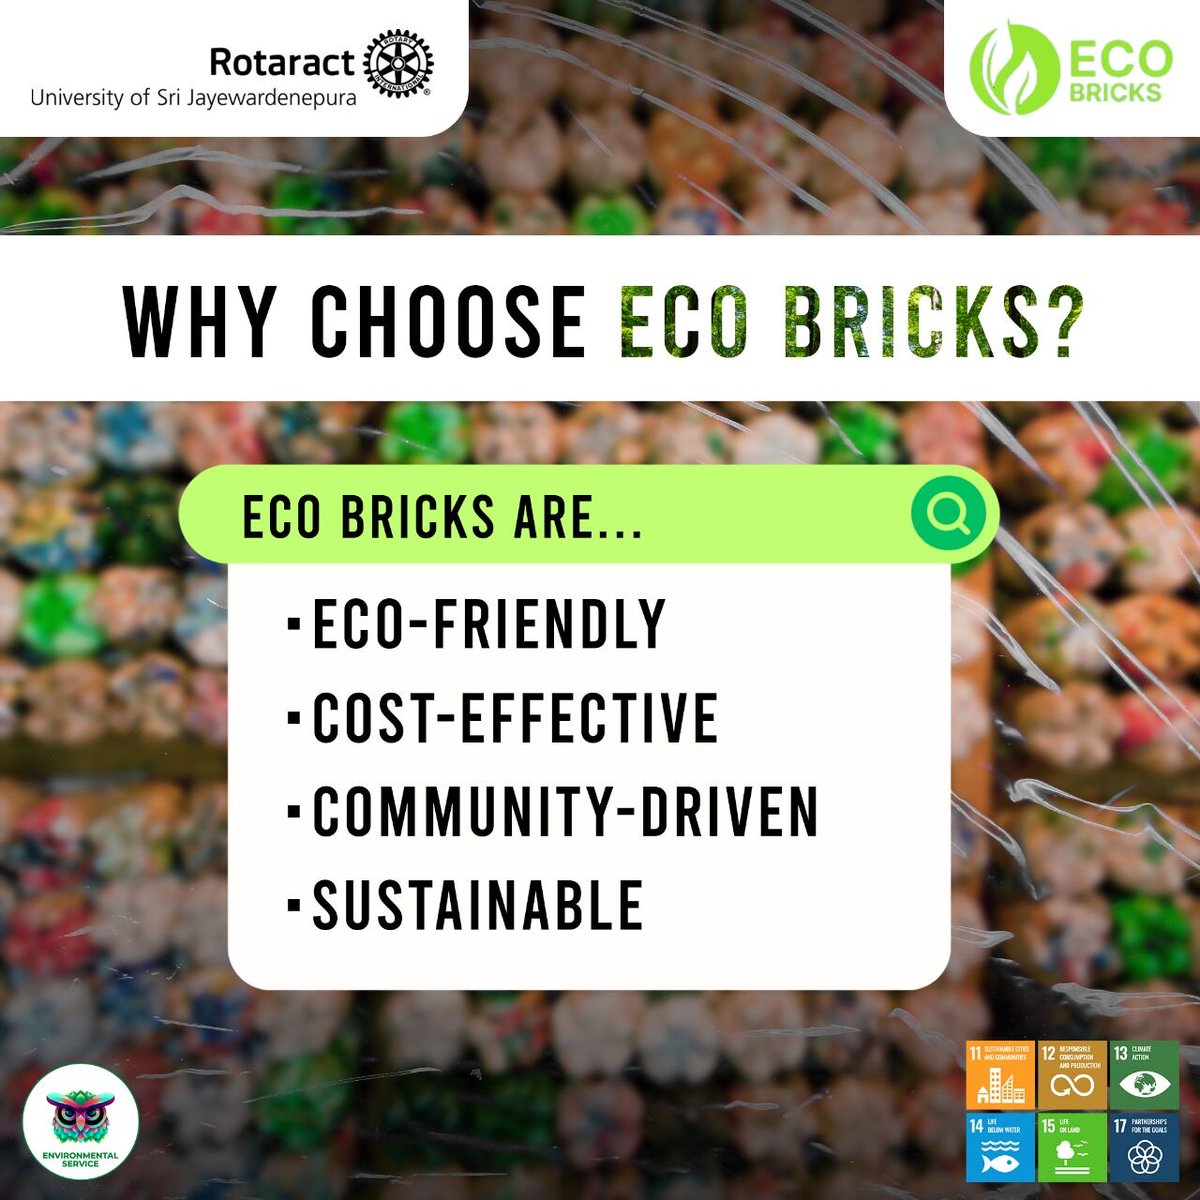 Choose eco bricks for a greener, budget-friendly option that builds communities and leads to a sustainable future. 

Make the eco-conscious choice today! 🌍

#EcoBricks 
#EnvironmentalService 
#RACUSJ 
#Rotaract 
#Rotaract3220 
#CreateHopeintheWorld 
#YouthForAll